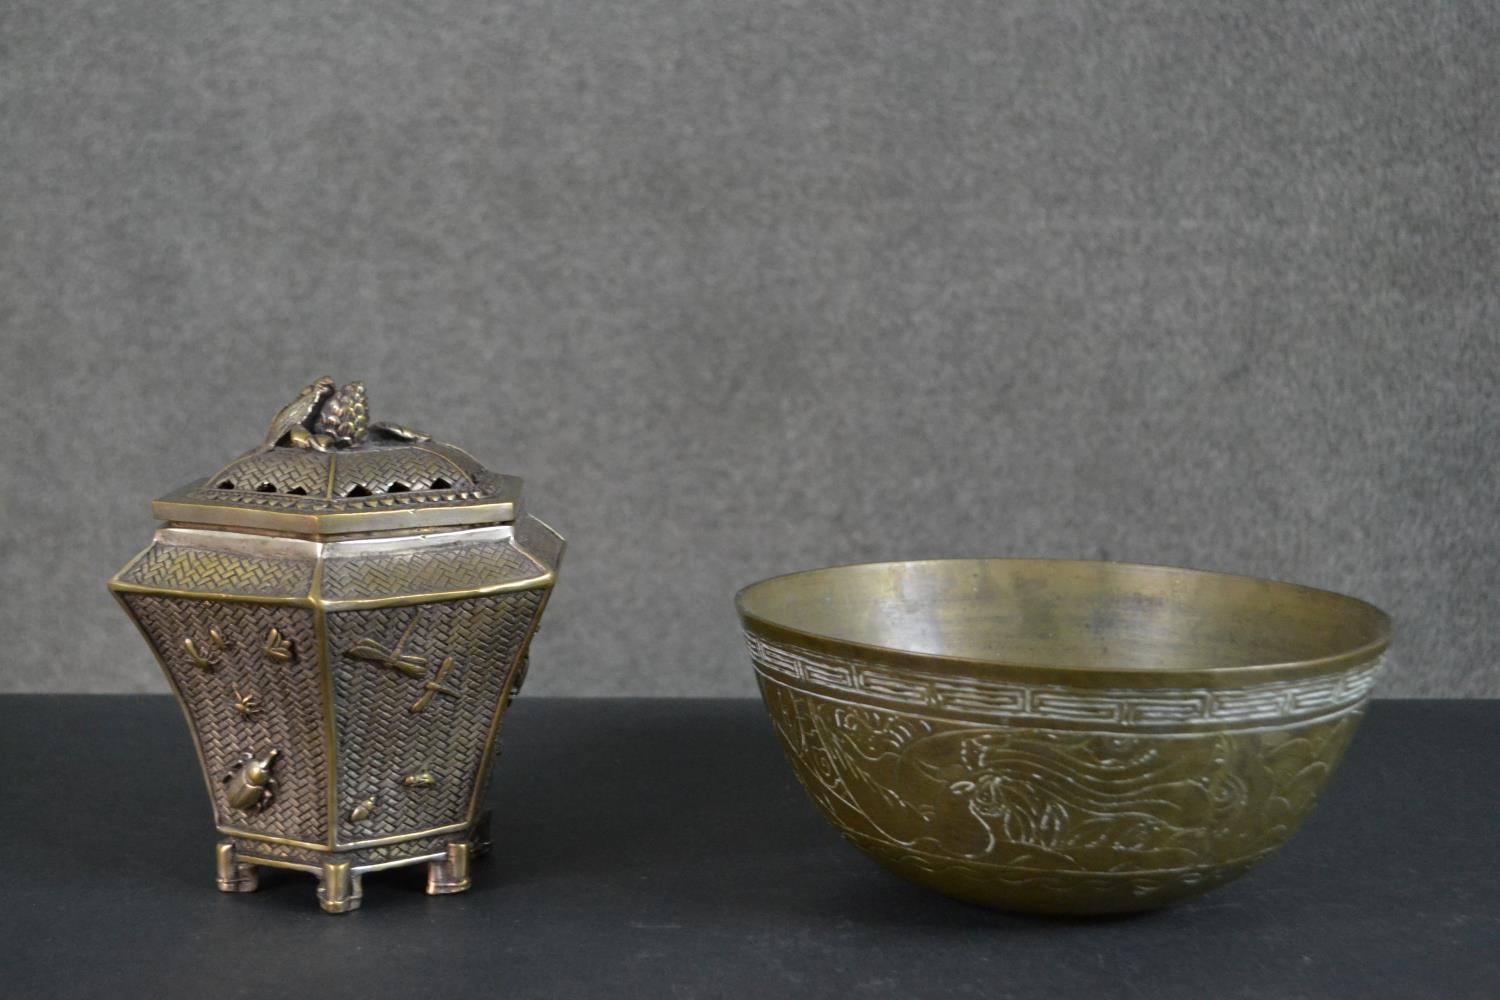 A Chinese brass woven design lidded box with relief insects and cicada finial along with an engraved